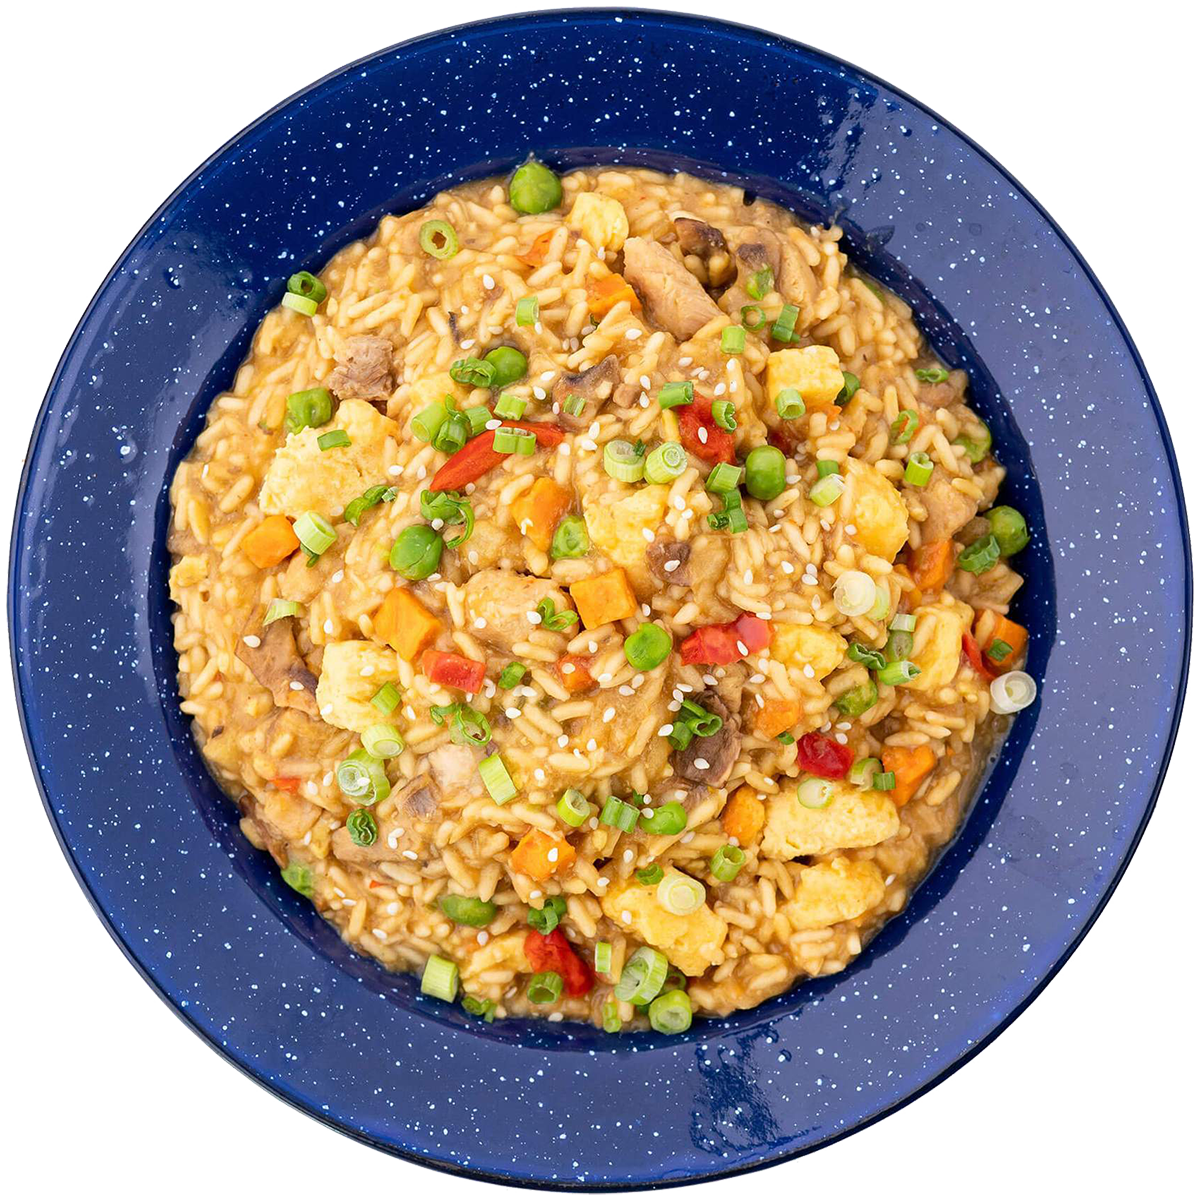 Chicken and Fried Rice (2 Servings) alternate view